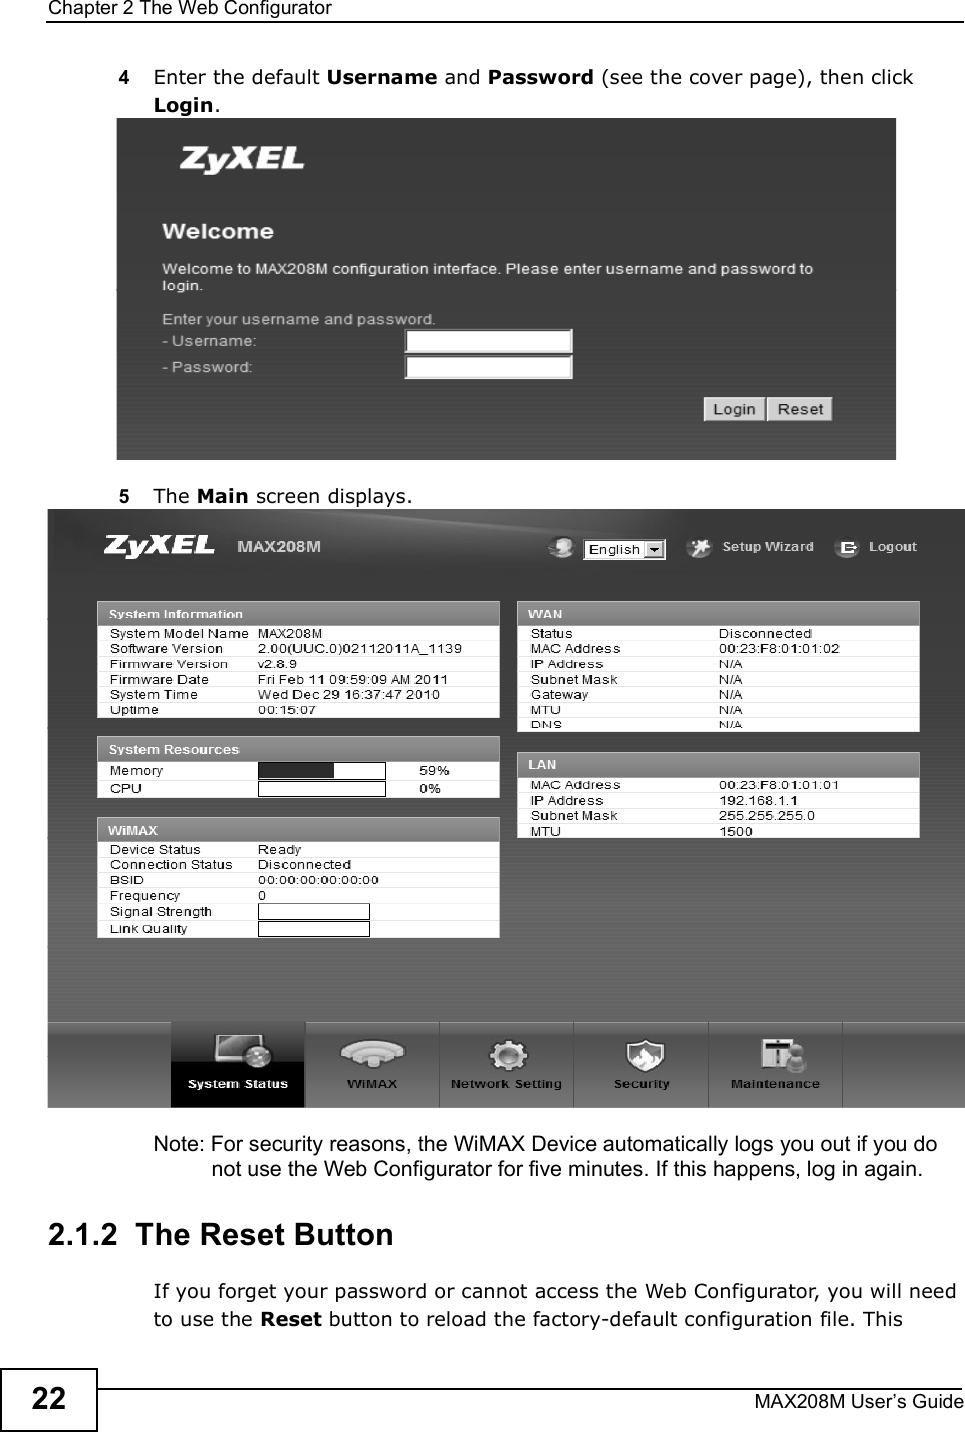 Chapter 2The Web ConfiguratorMAX208M User s Guide224Enter the default Username and Password (see the cover page), then click Login. 5The Main screen displays. Note: For security reasons, the WiMAX Device automatically logs you out if you do not use the Web Configurator for five minutes. If this happens, log in again.2.1.2  The Reset ButtonIf you forget your password or cannot access the Web Configurator, you will need to use the Reset button to reload the factory-default configuration file. This 